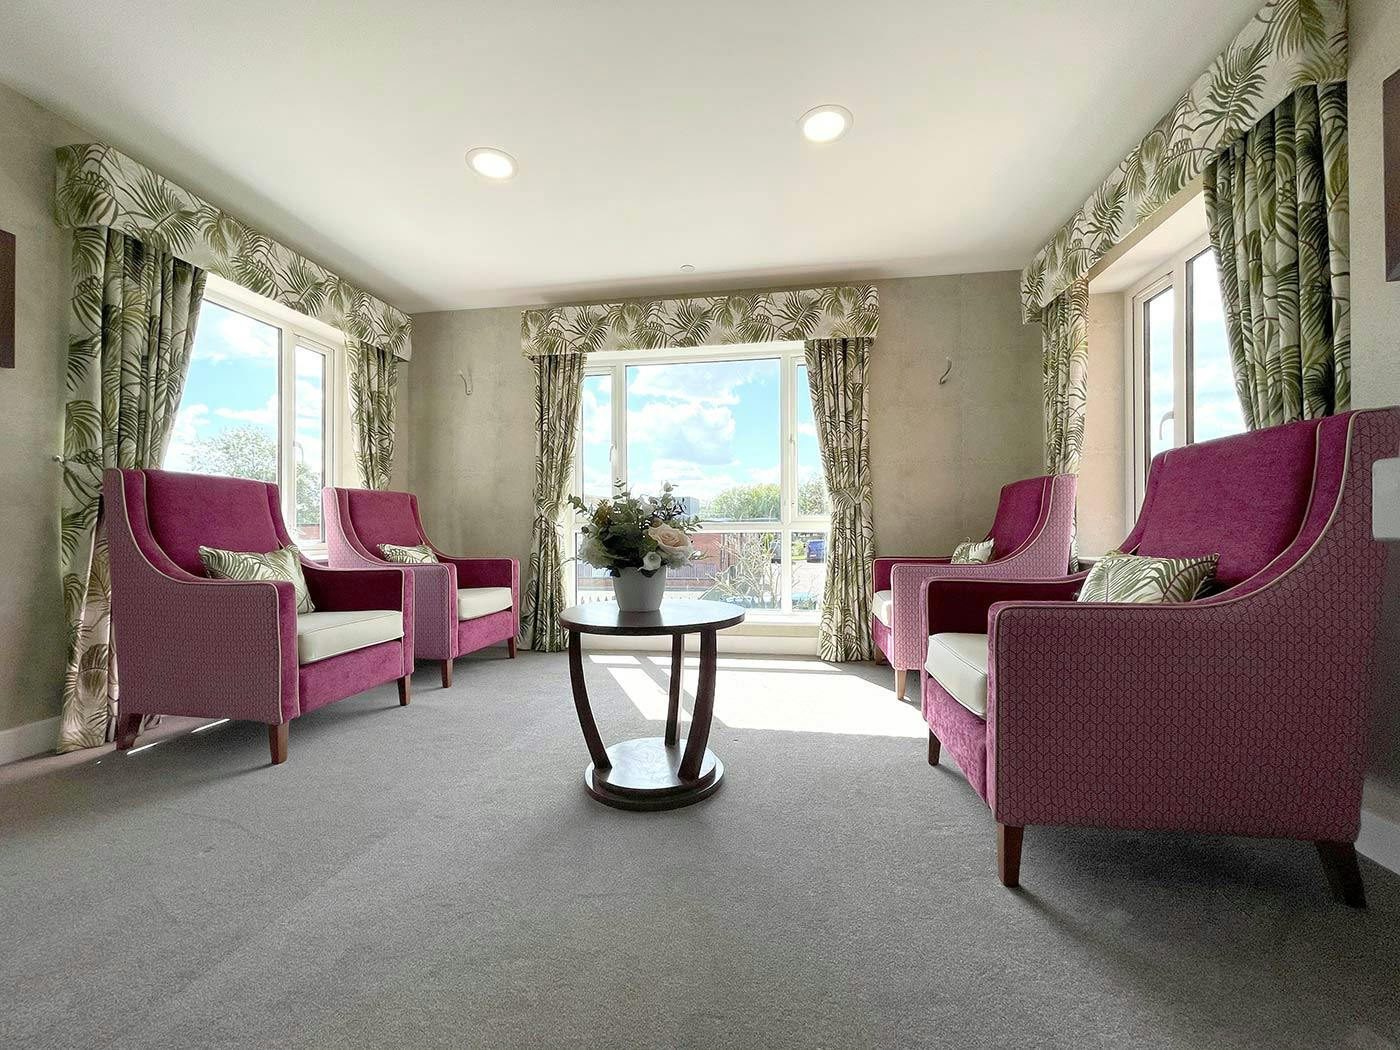 Studley Rose Care Home in Warwickshire 5